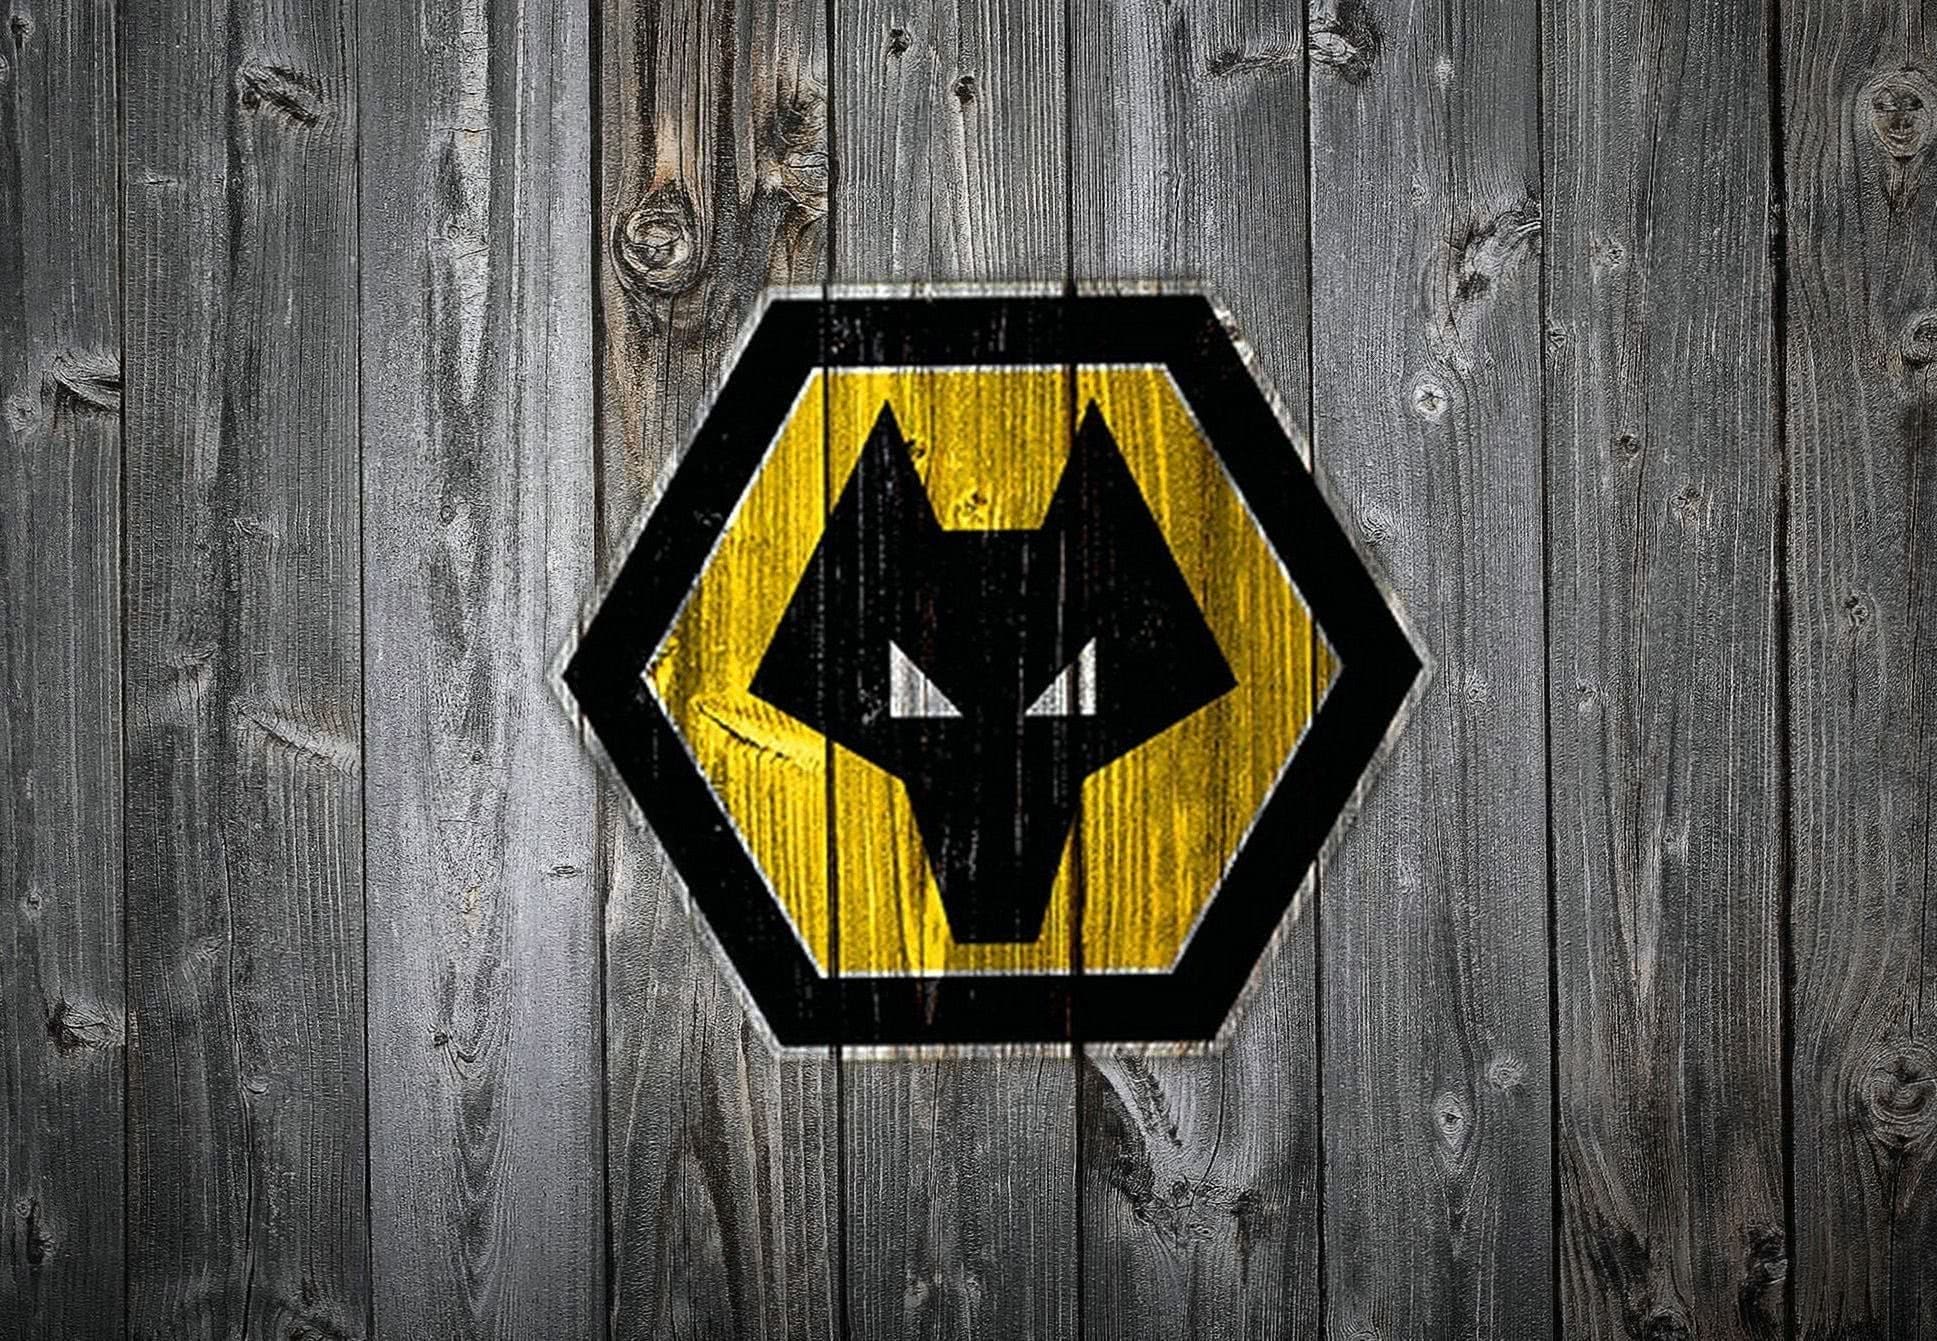 Wolves Fc Wallpapers App